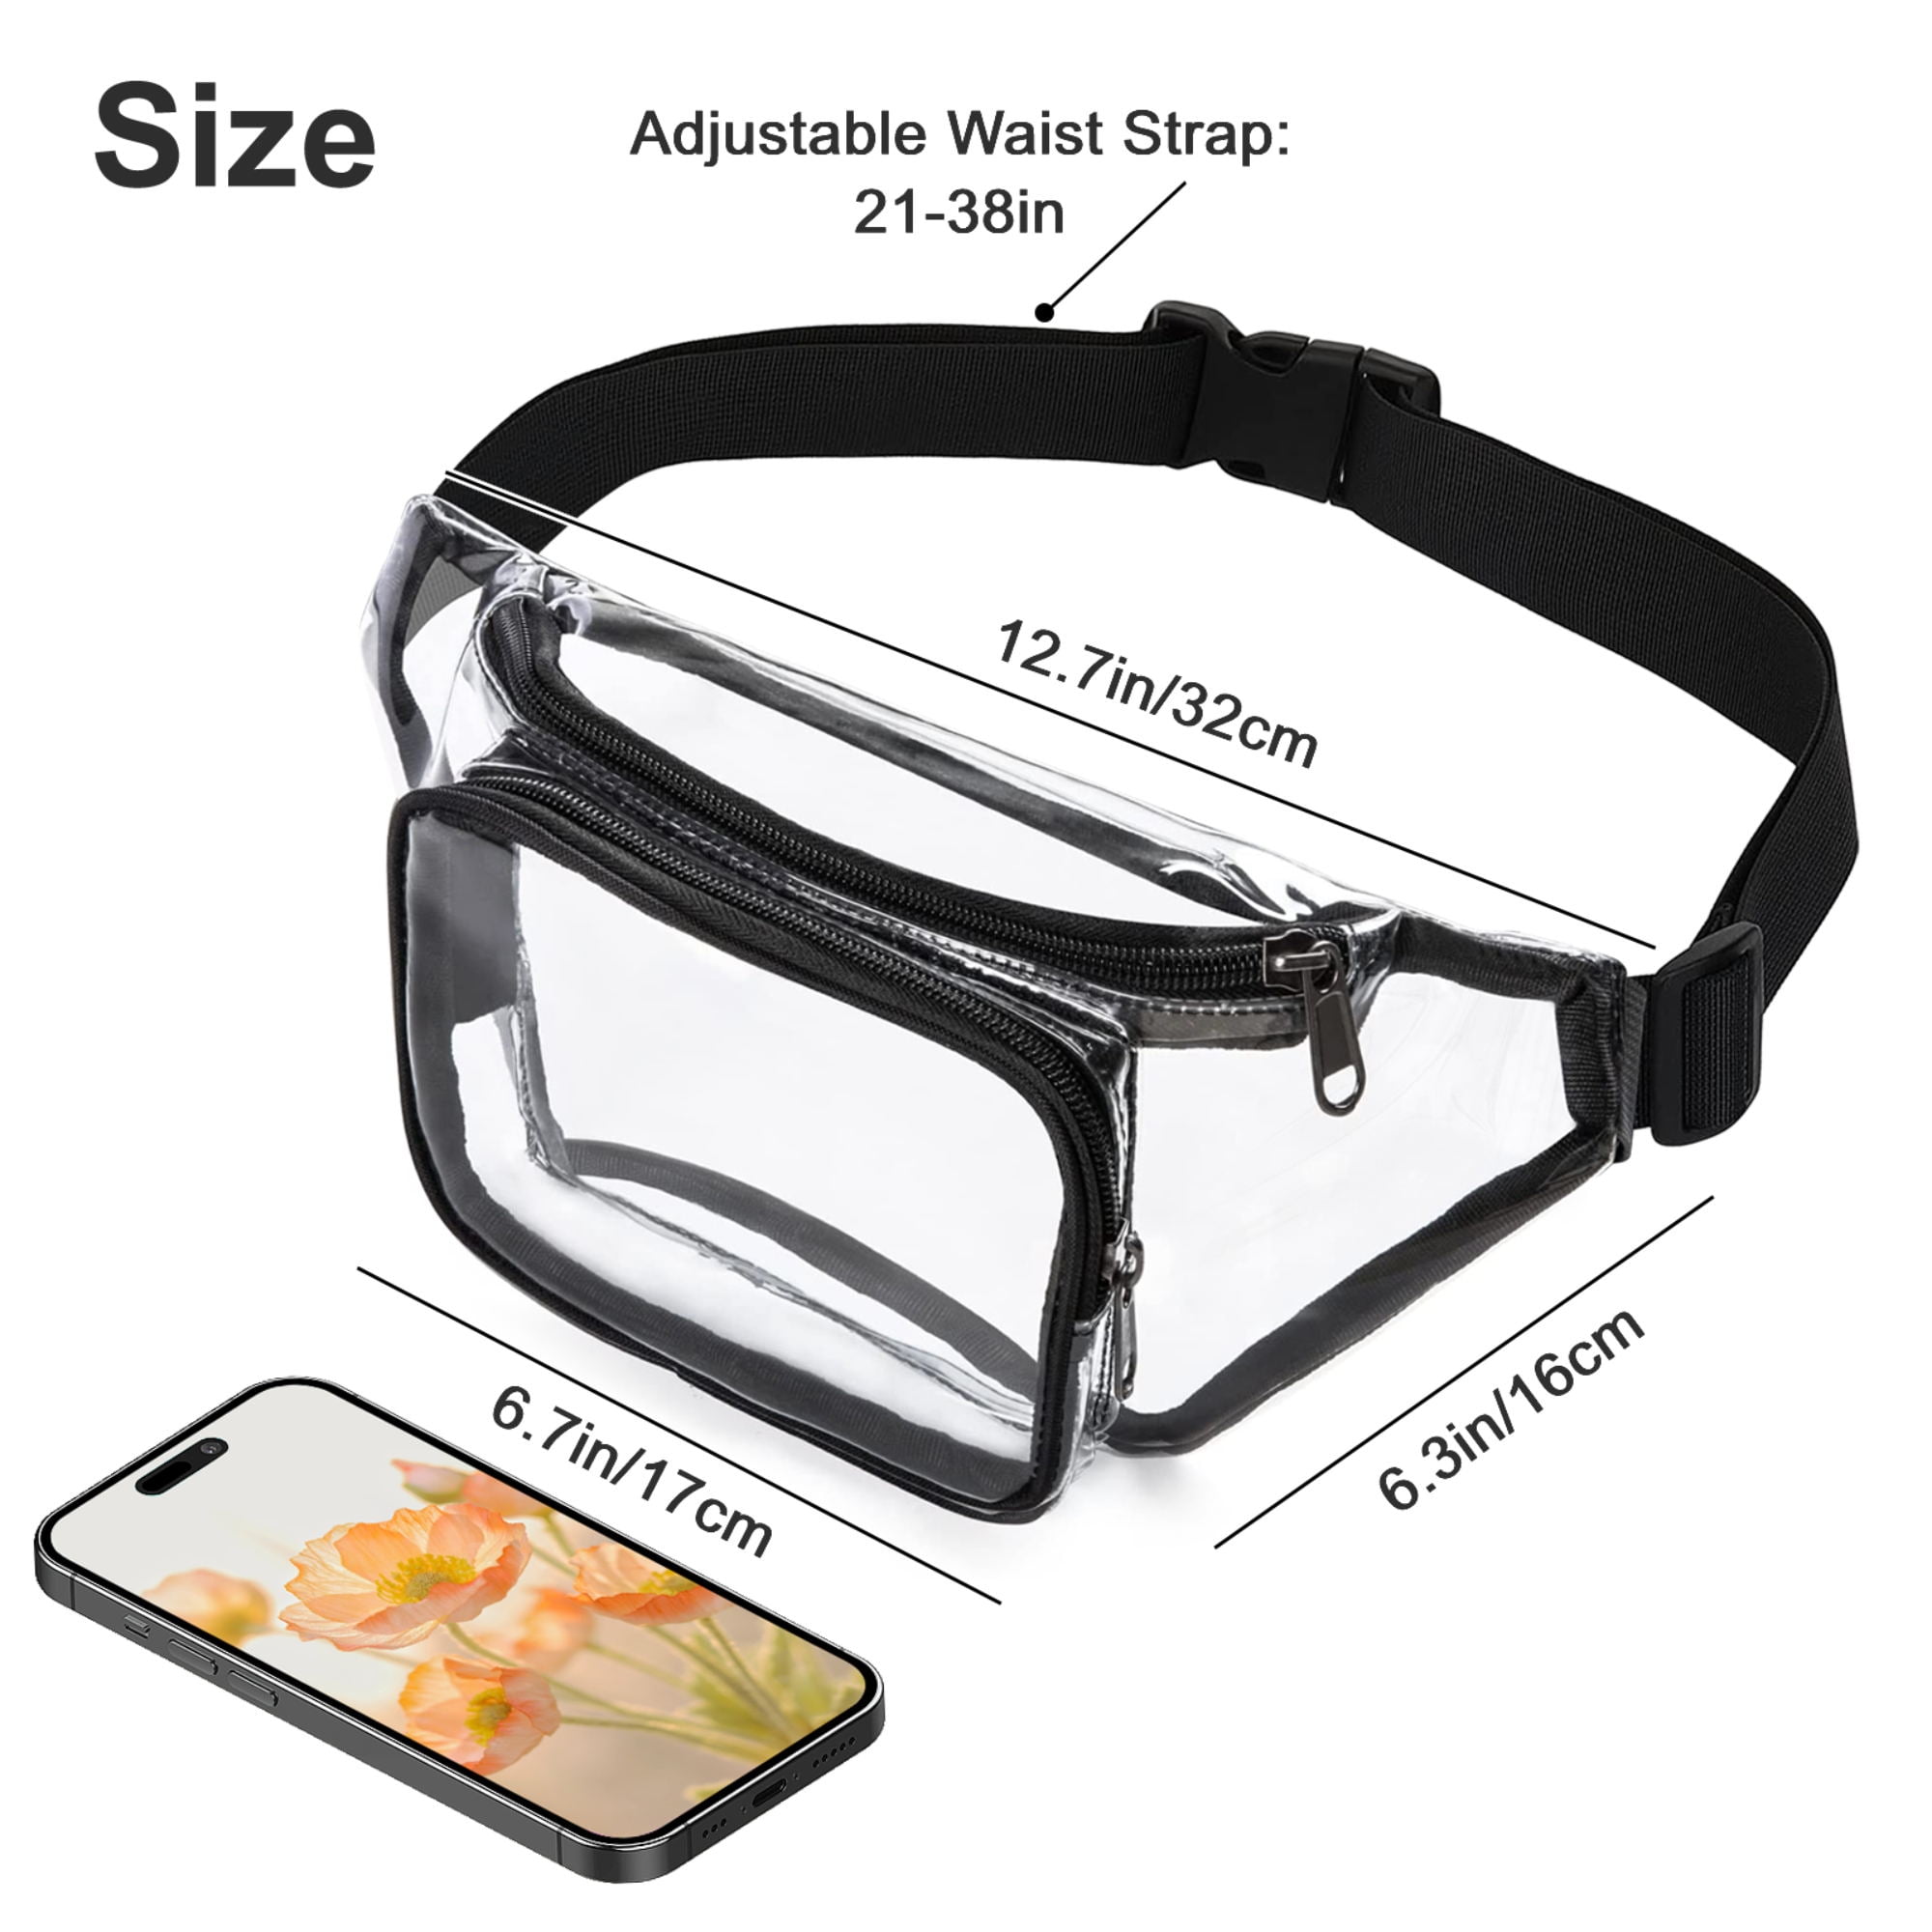  Clear Fanny Pack Stadium Approved for Women Men with  Adjustable Strap,Crossbody Clear Belt Waist Bag Pouch for Concerts Hiking  Running Beige